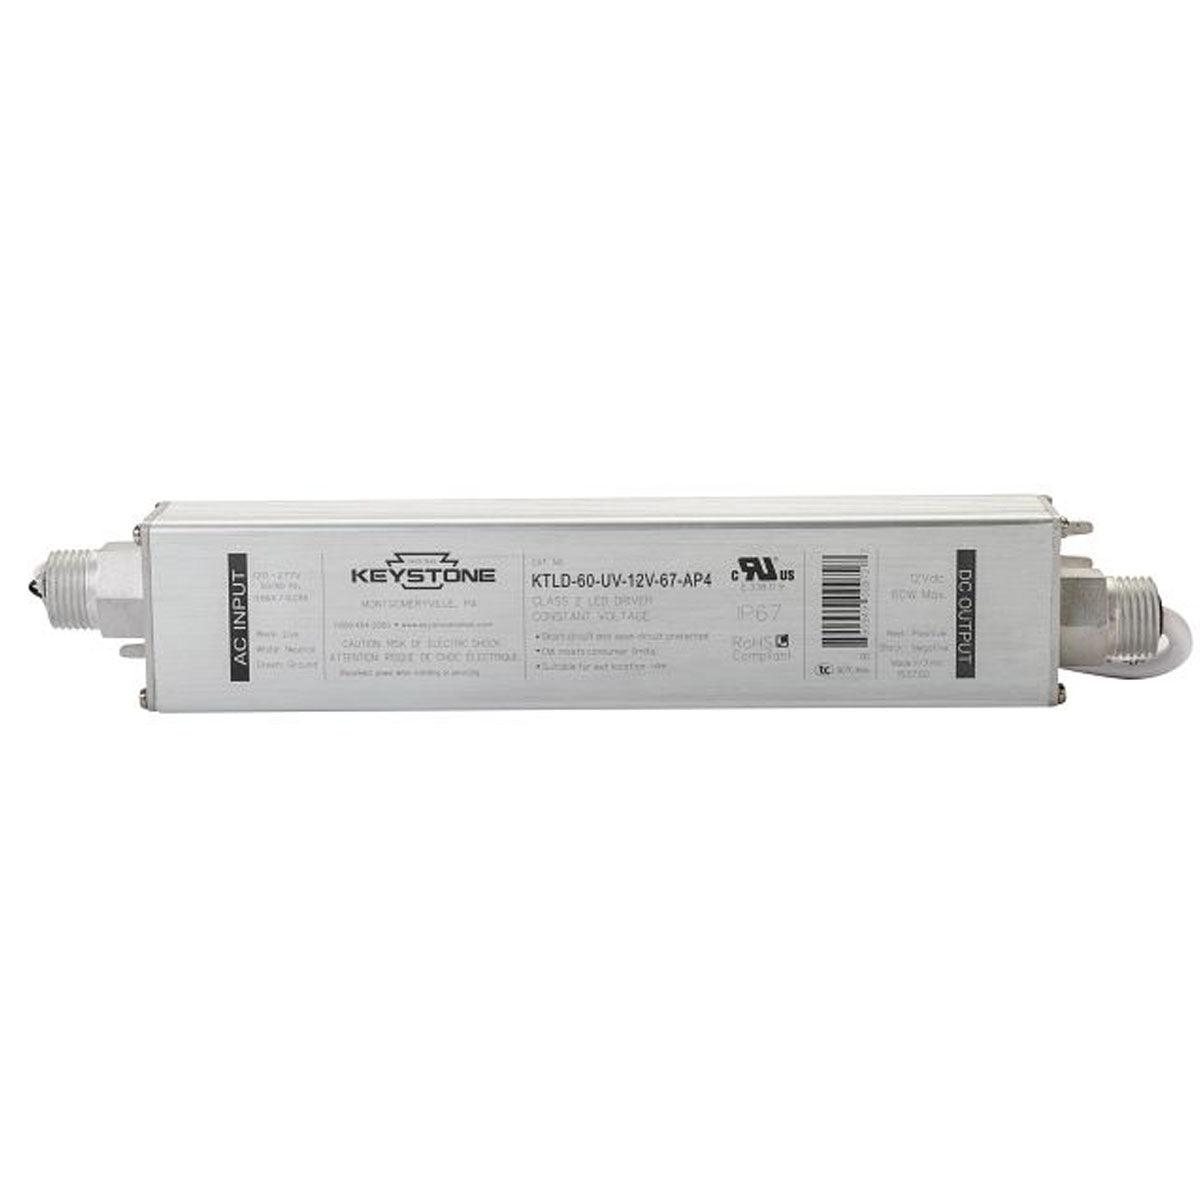 60 Watts, 12VDC Class 2 Constant Voltage LED Diver, 120-277V Input, IP67 Rated - Bees Lighting